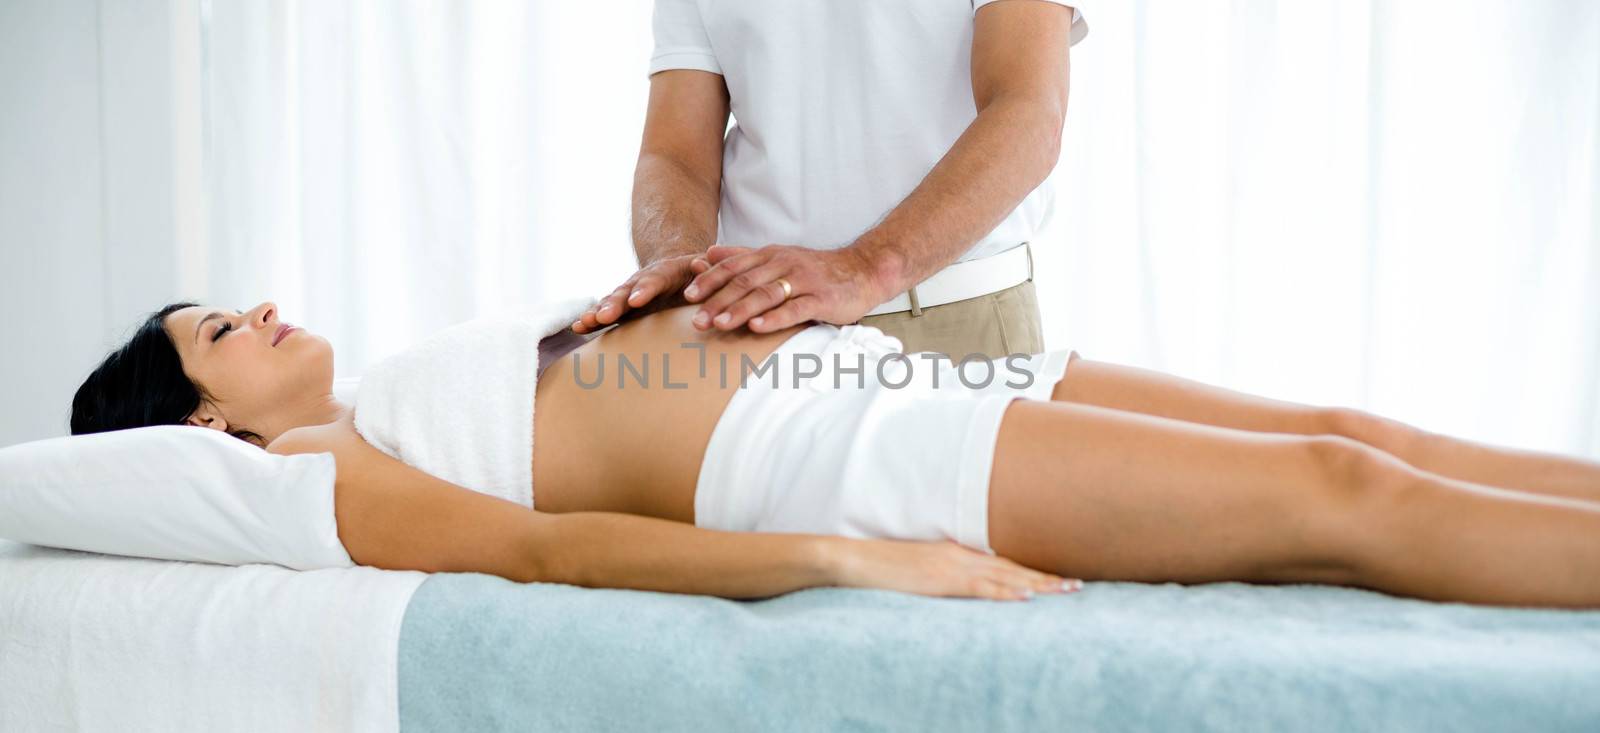 Pregnant woman receiving a stomach massage from masseur at home